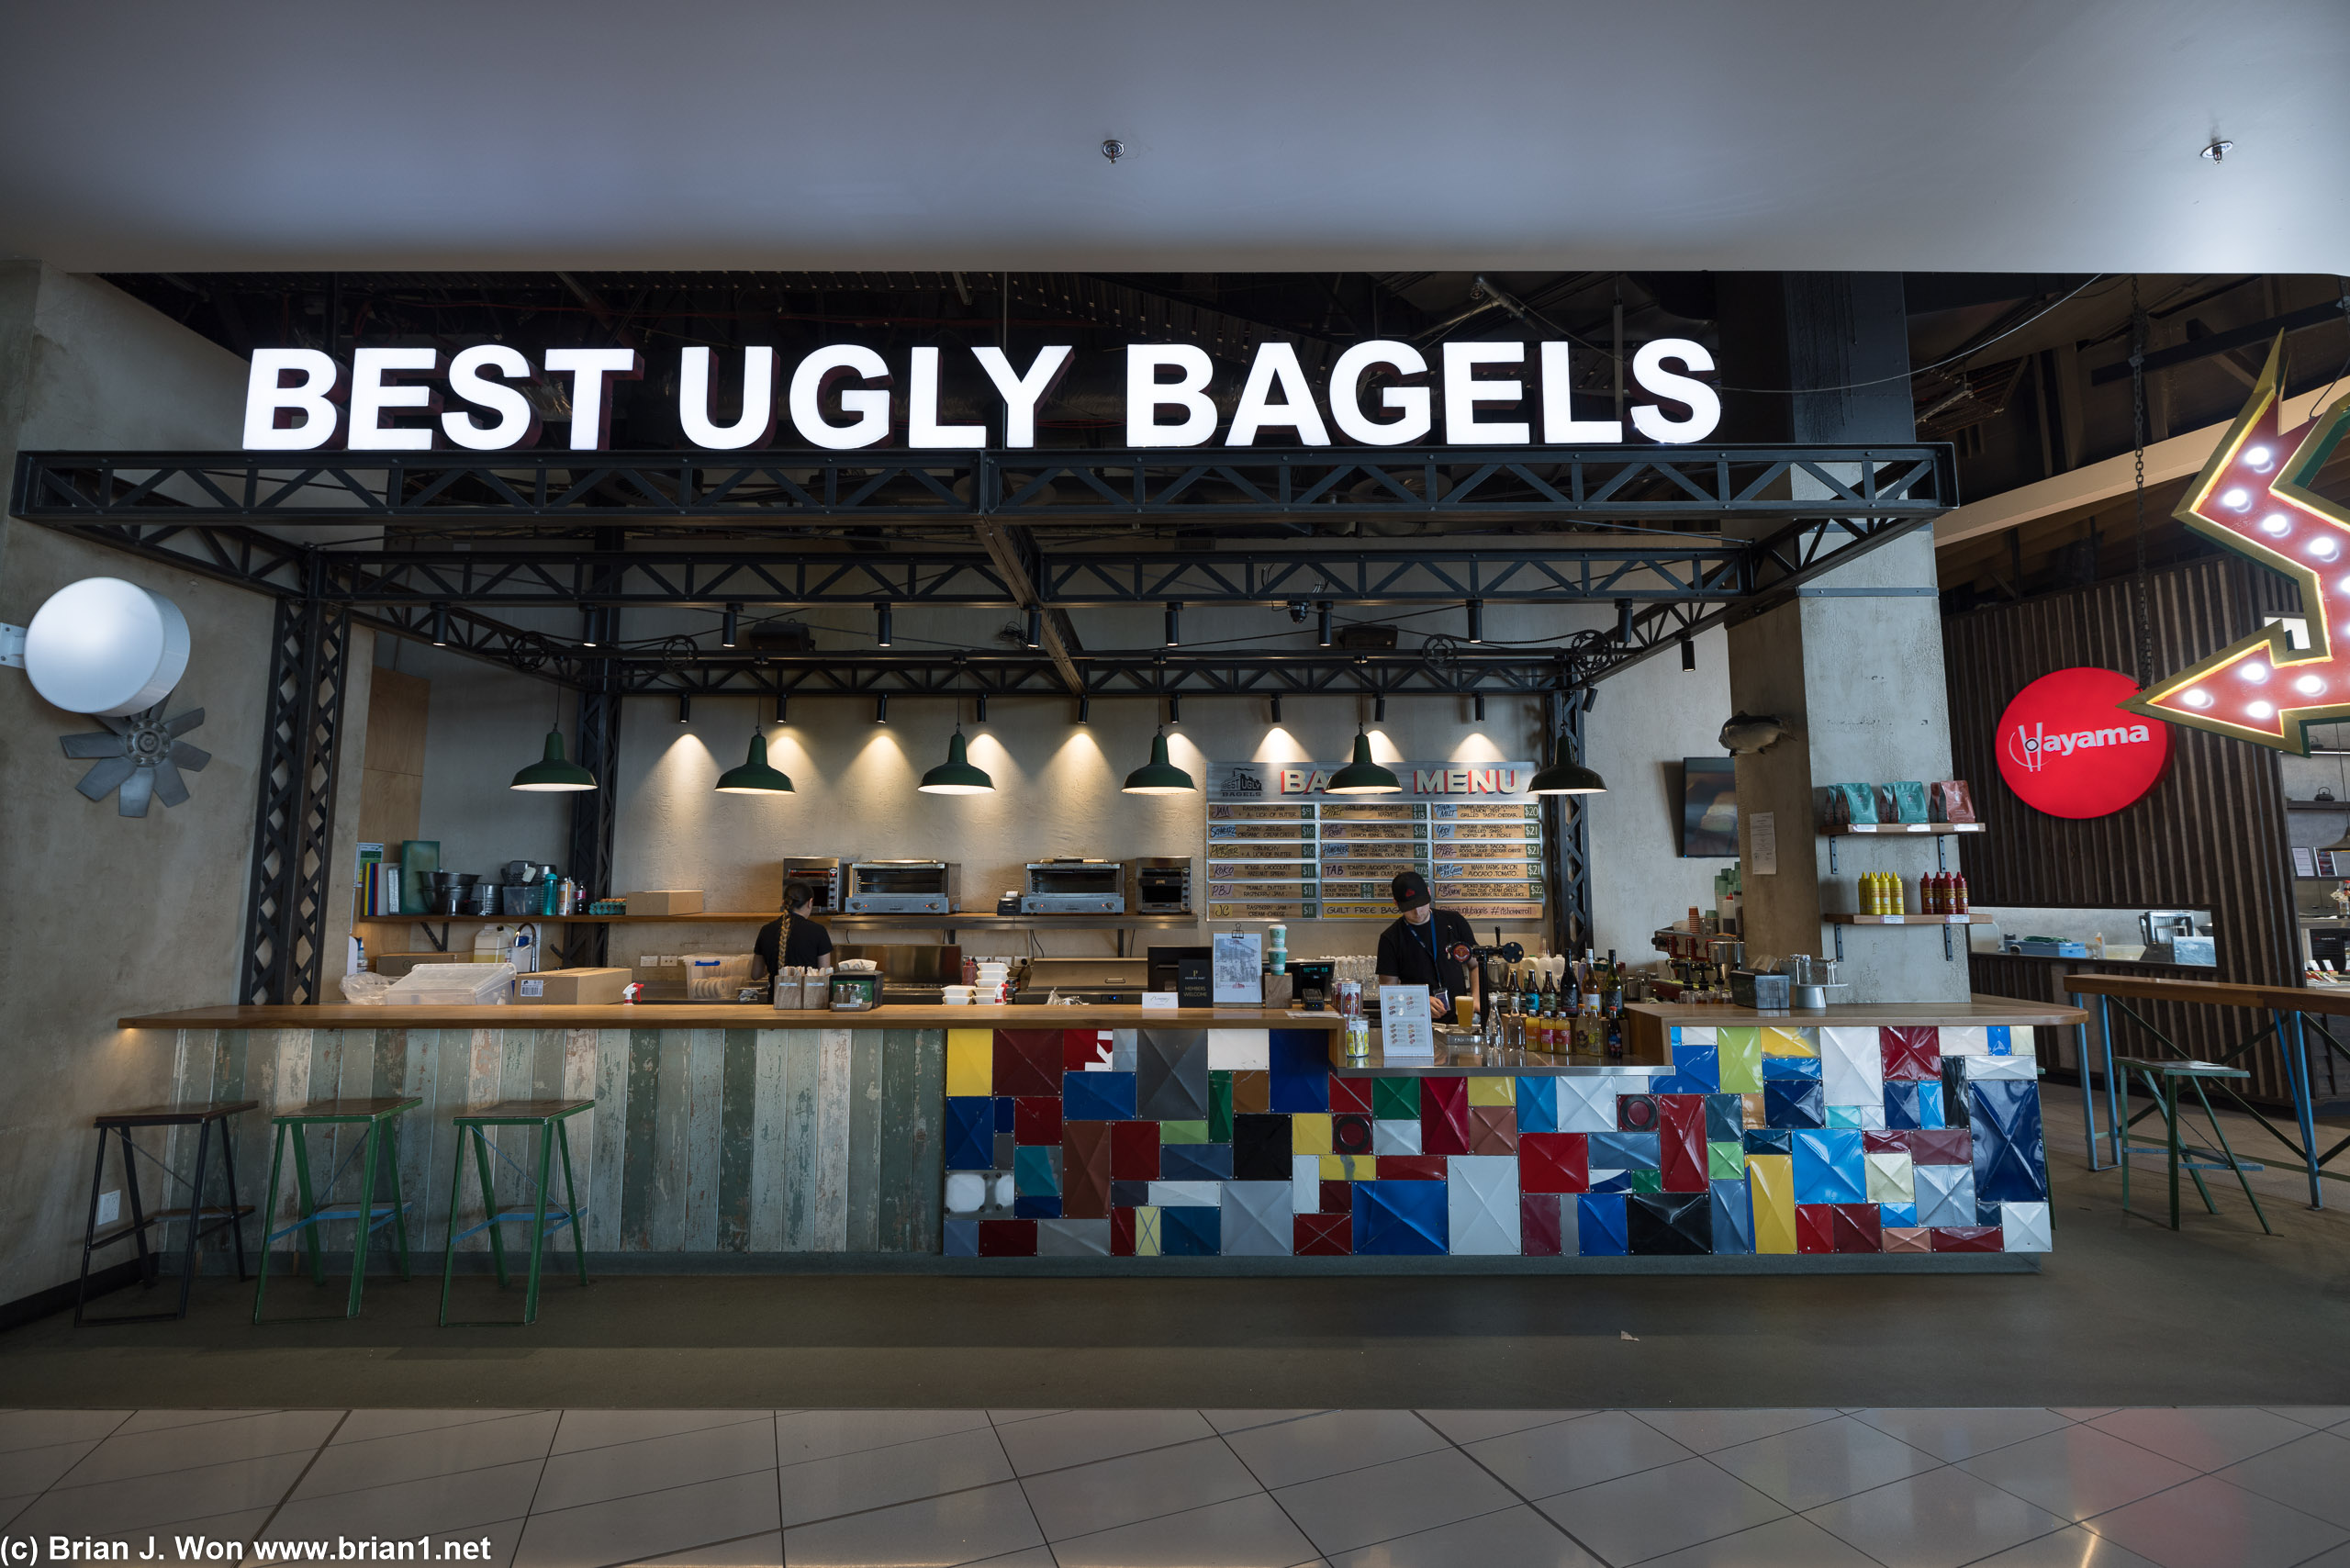 Best Ugly Bagels is part of Priority Pass... was very tempting...